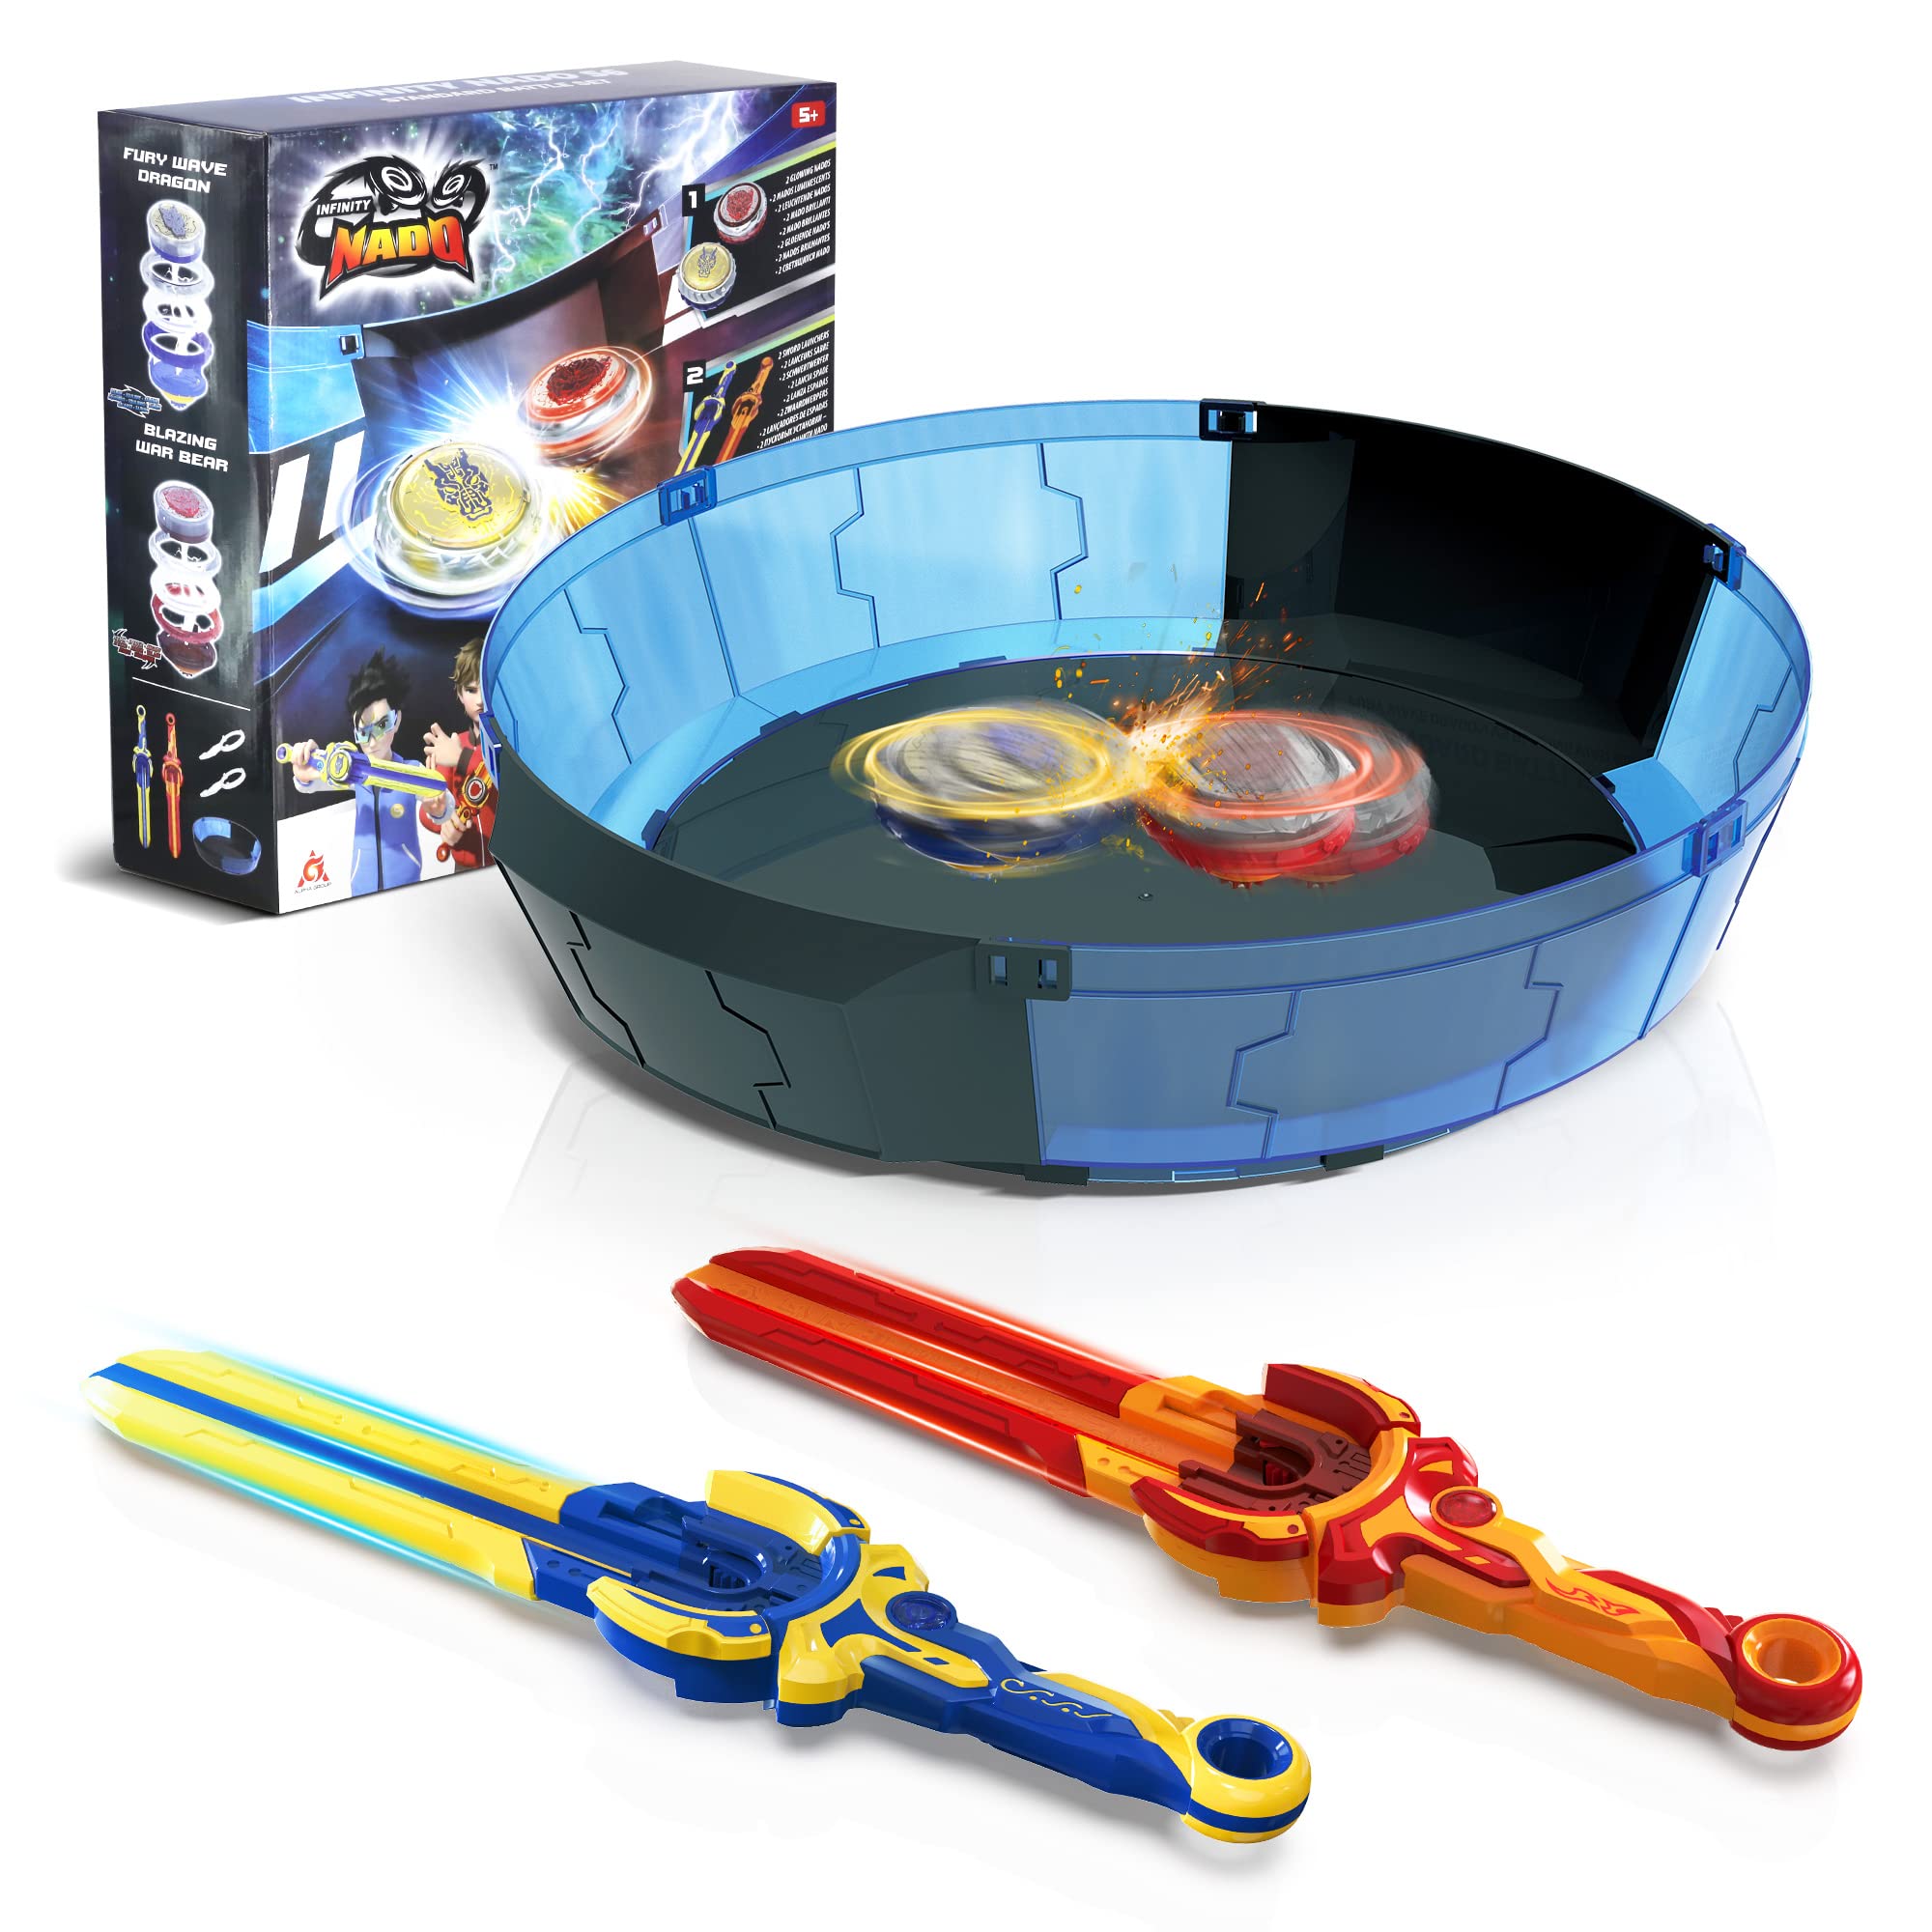 Infinity Nado Stadium - Battling Tops Burst Toy for Boys Grils Age 8-12 - Including Beystadium, 2 Gaming Top Toys, 2 Sword Launcher - Sapphire Blue and Flame Red